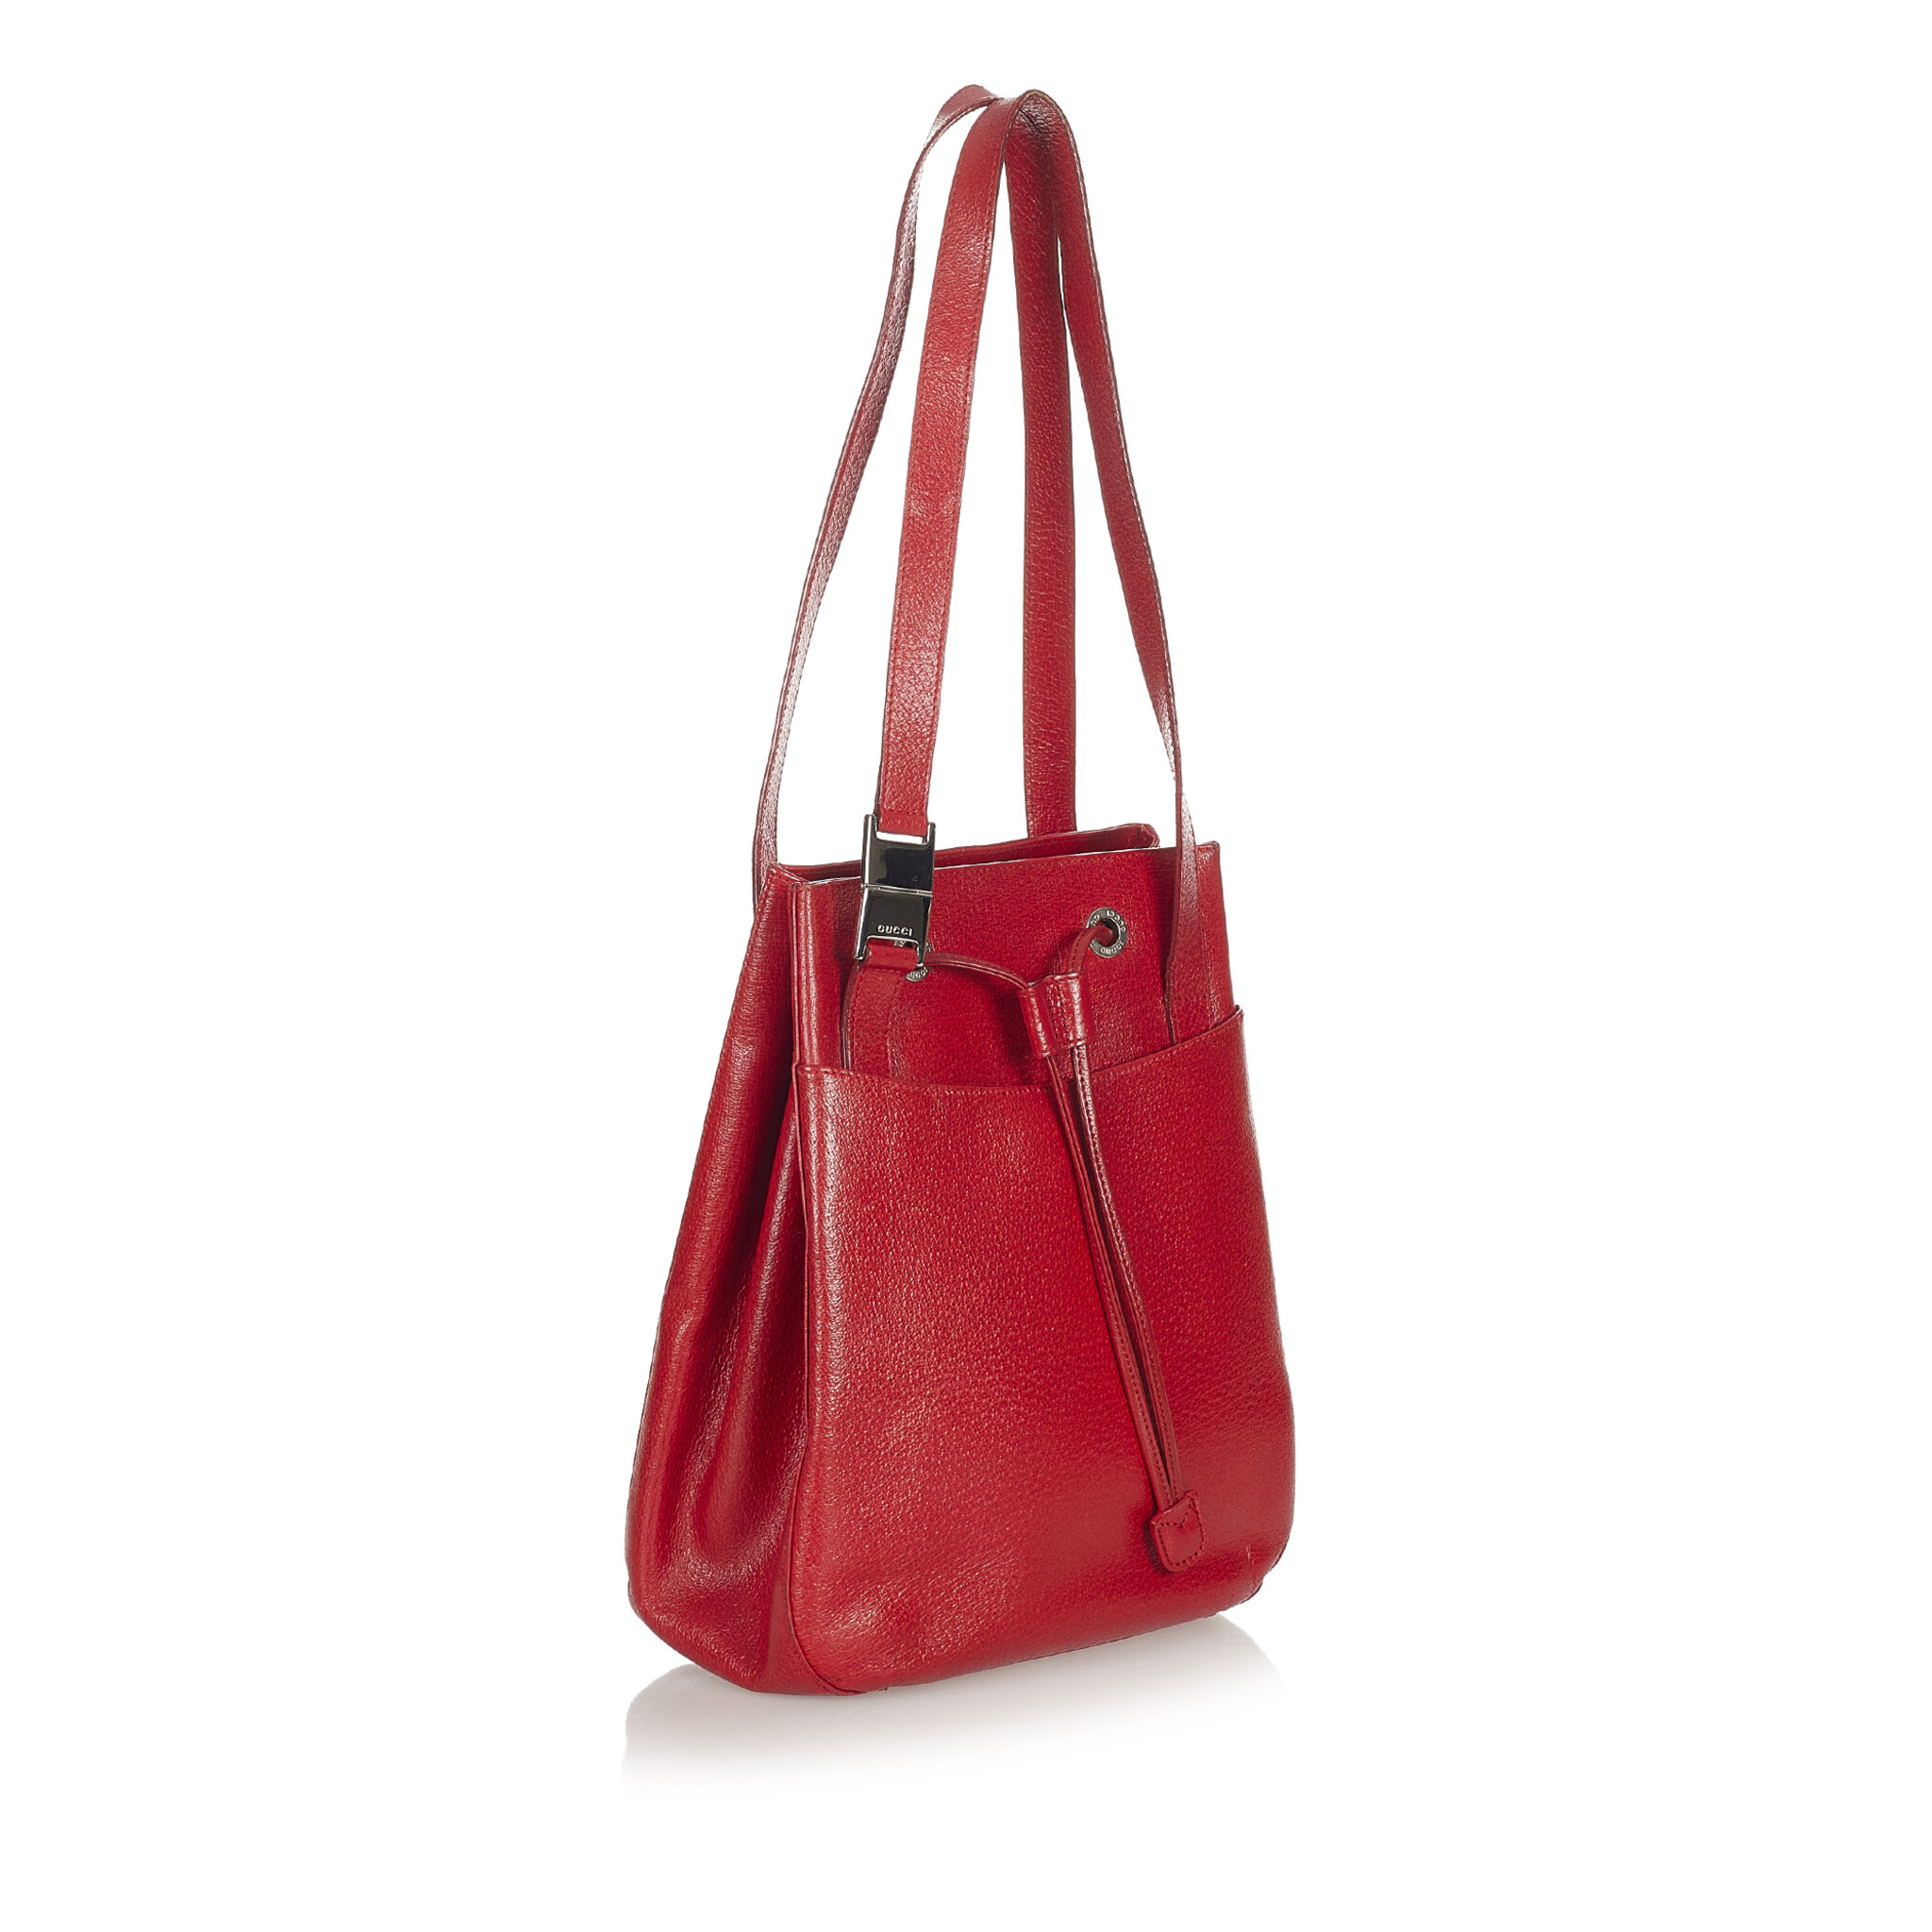 Gucci Leather Bucket Bag, ONESIZE, red